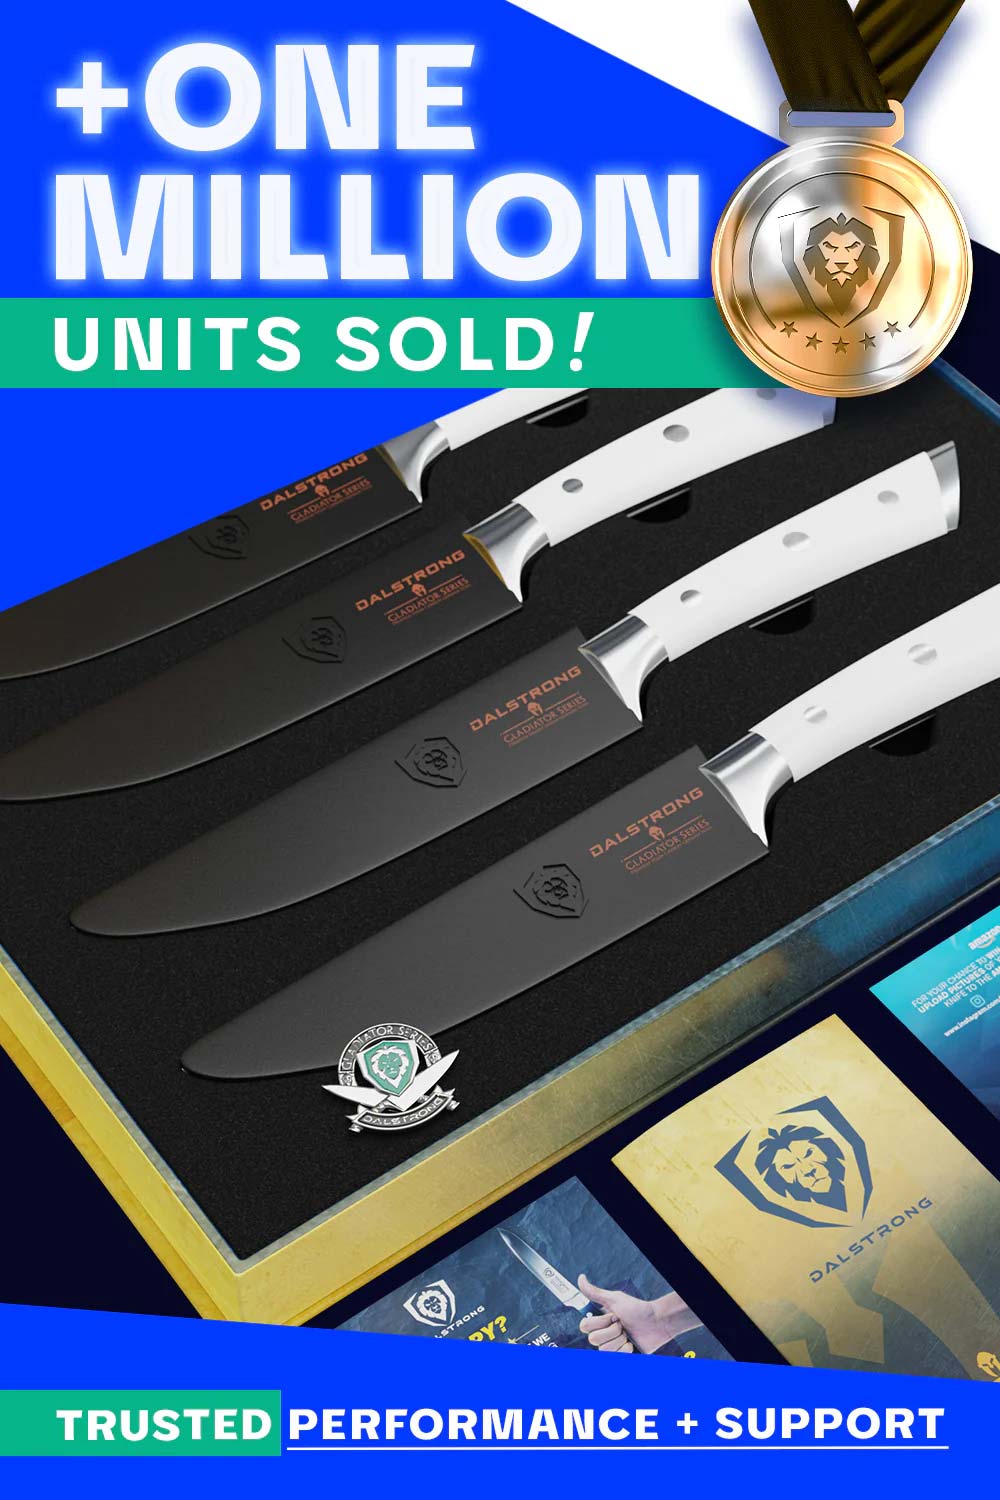 Dalstrong gladiator series 4 piece steak knife set with white handles and black sheaths iside of it's premium packaging.